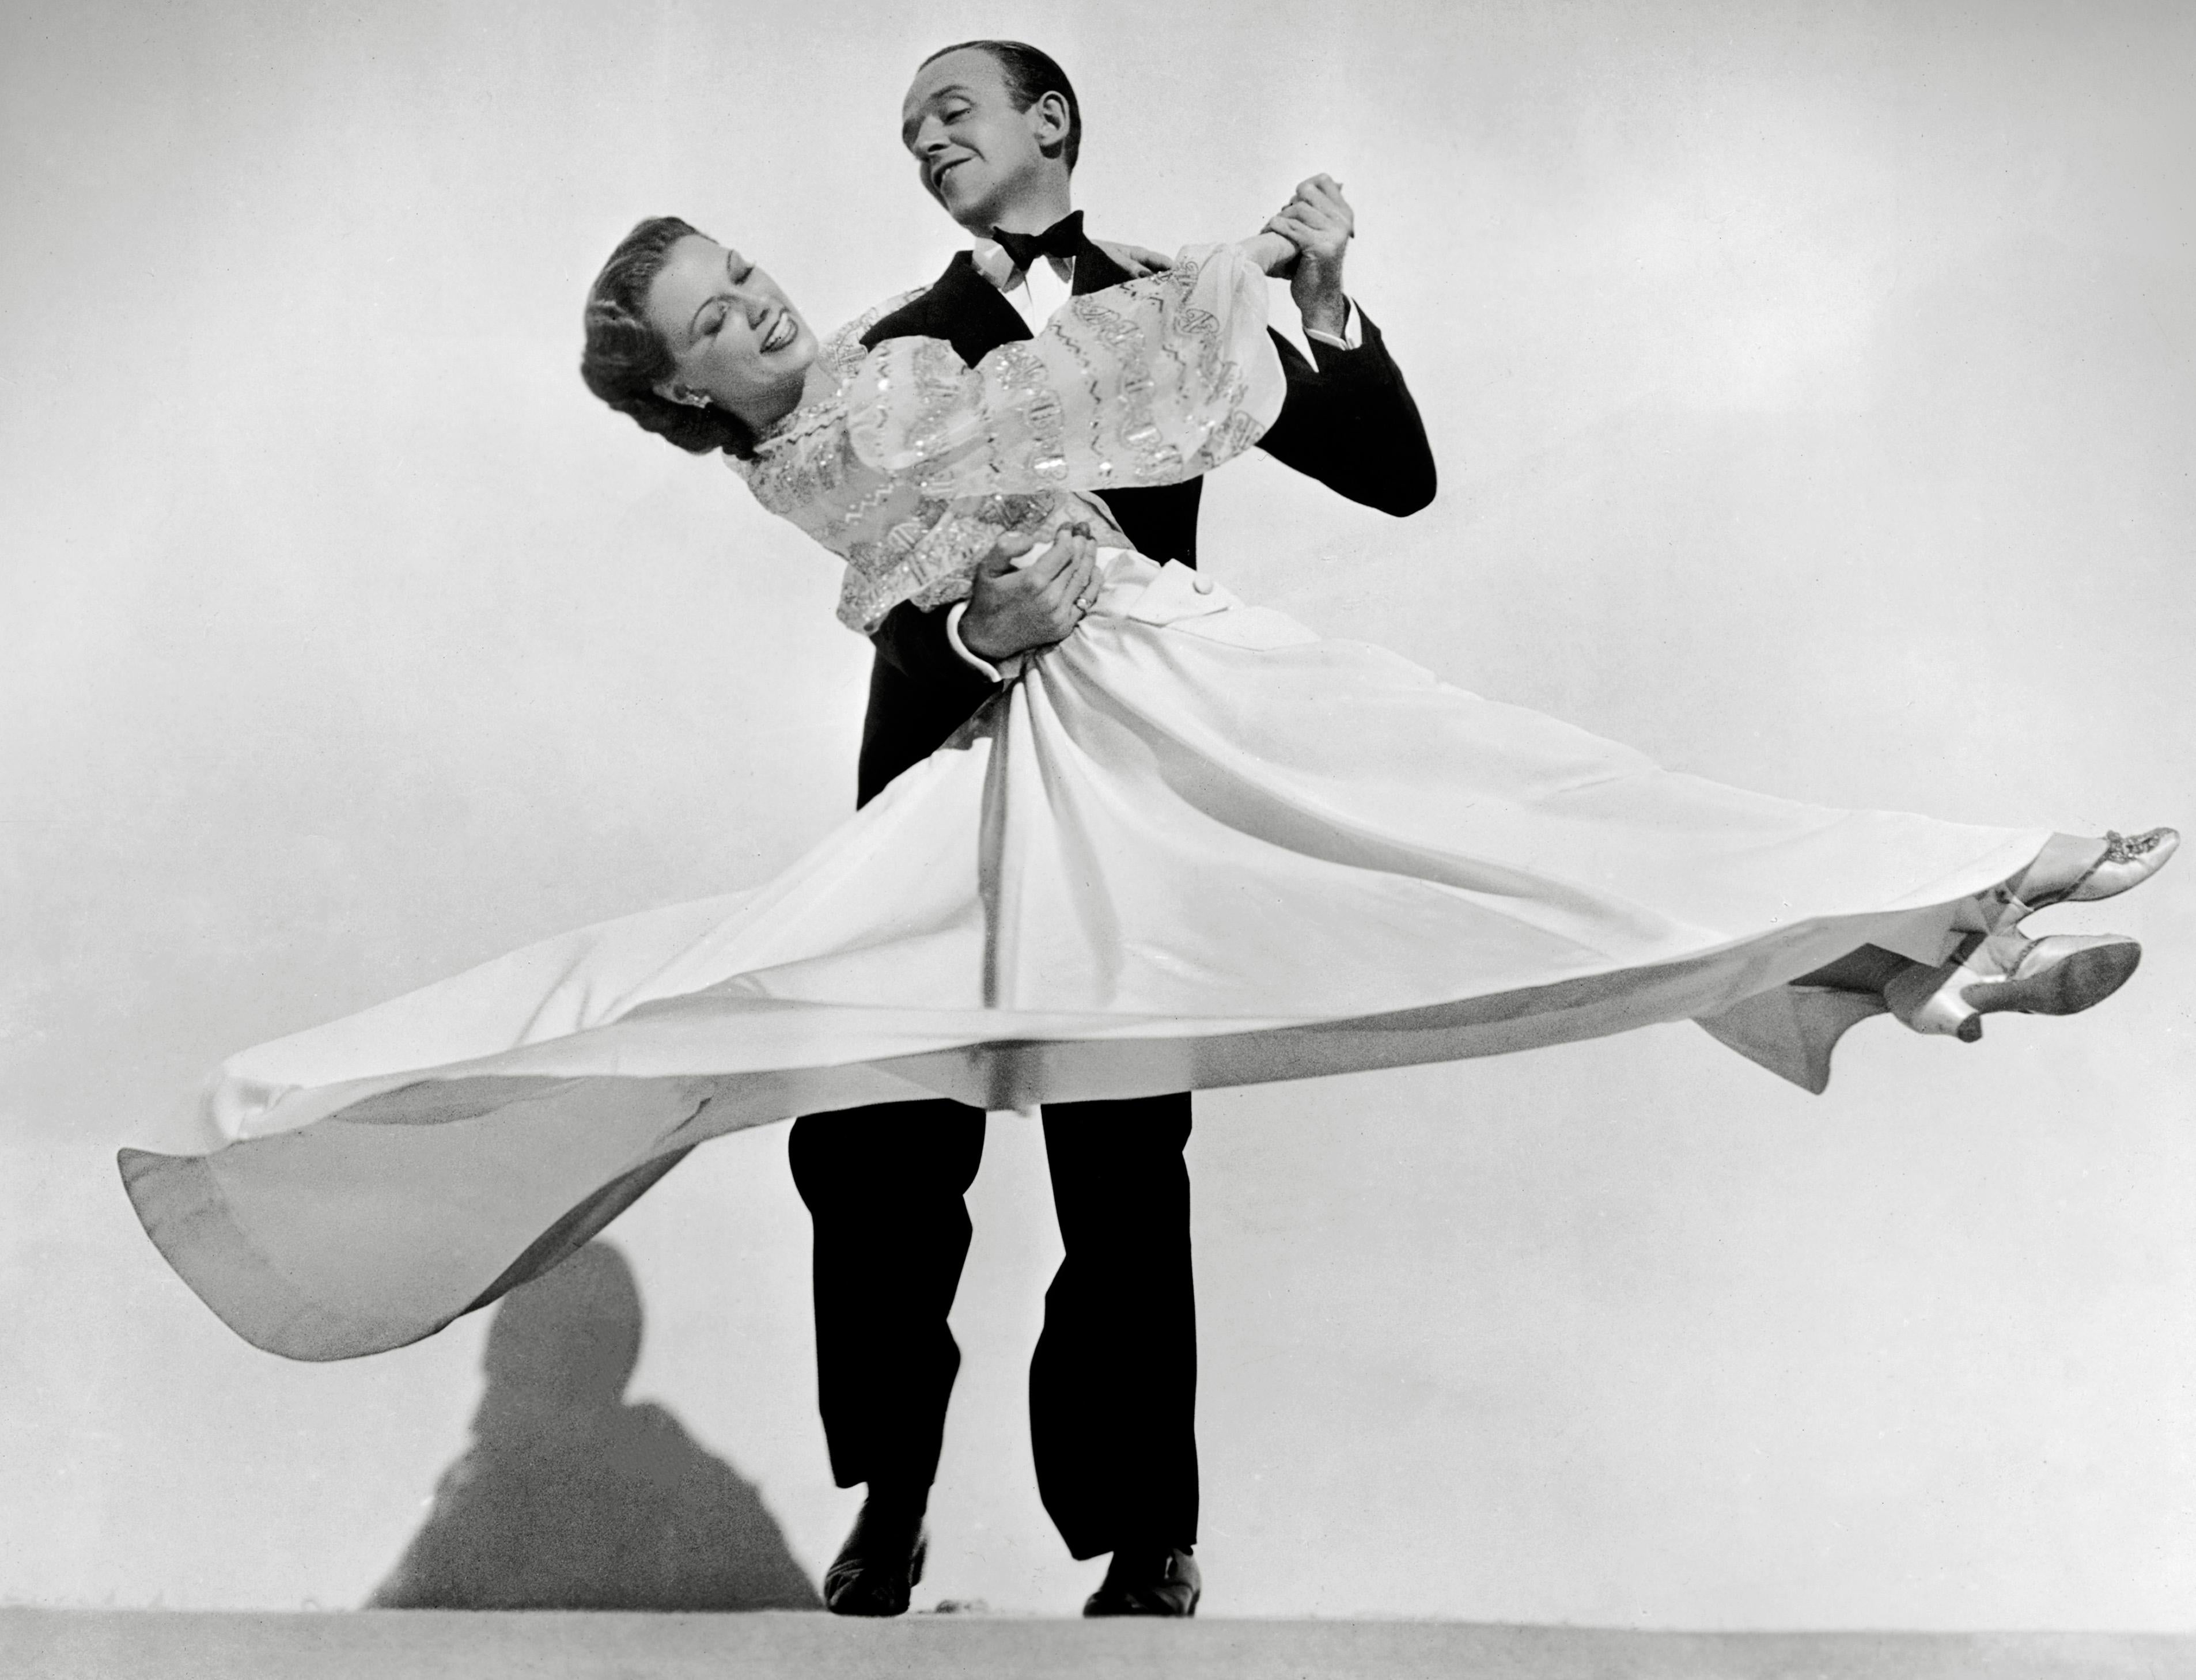 Unknown Portrait Photograph - Fred Astaire and Eleanor Powell Dancing Globe Photos Fine Art Print